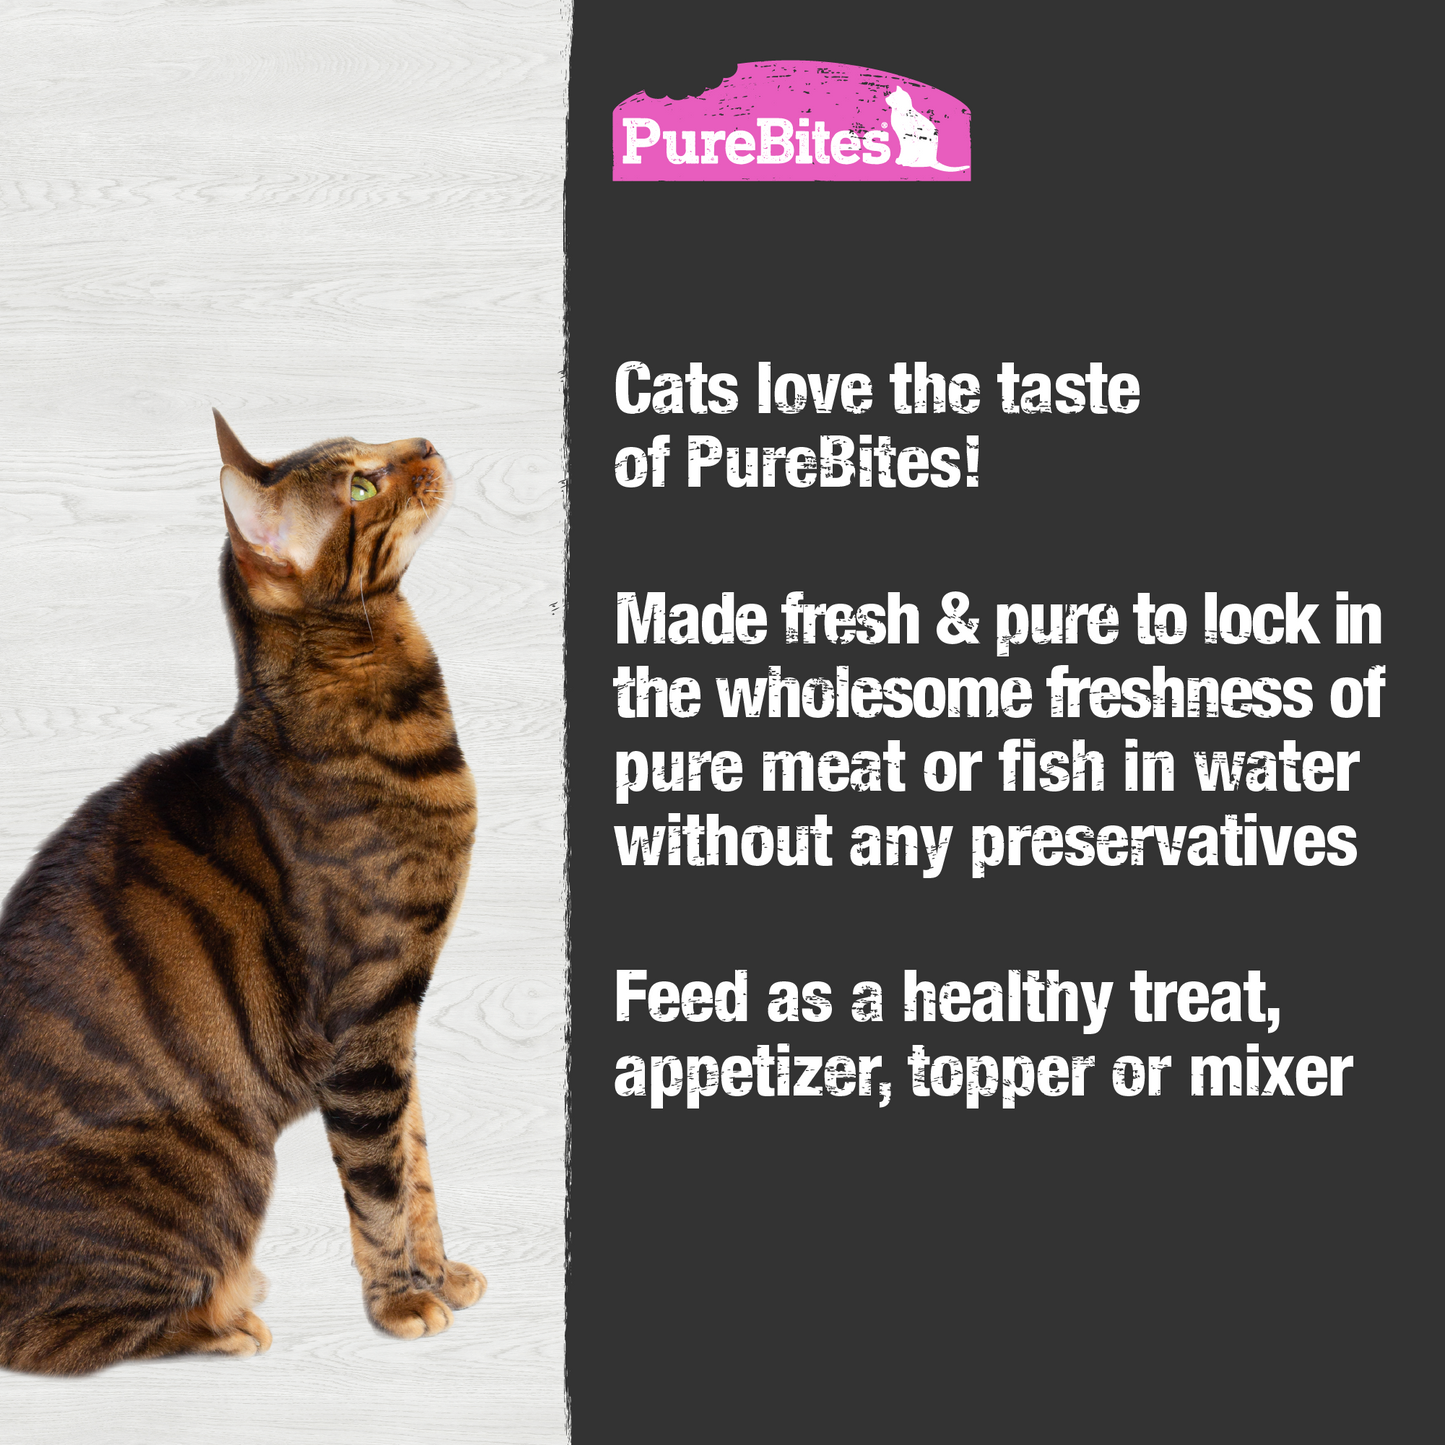 Made fresh & pure means more protein and nutrients packed into every tray. The tuna & salmon in our wet mixers is delicately steamed to help preserve the ingredient's taste, and nutrition, and mirror a cat’s ancestral diet